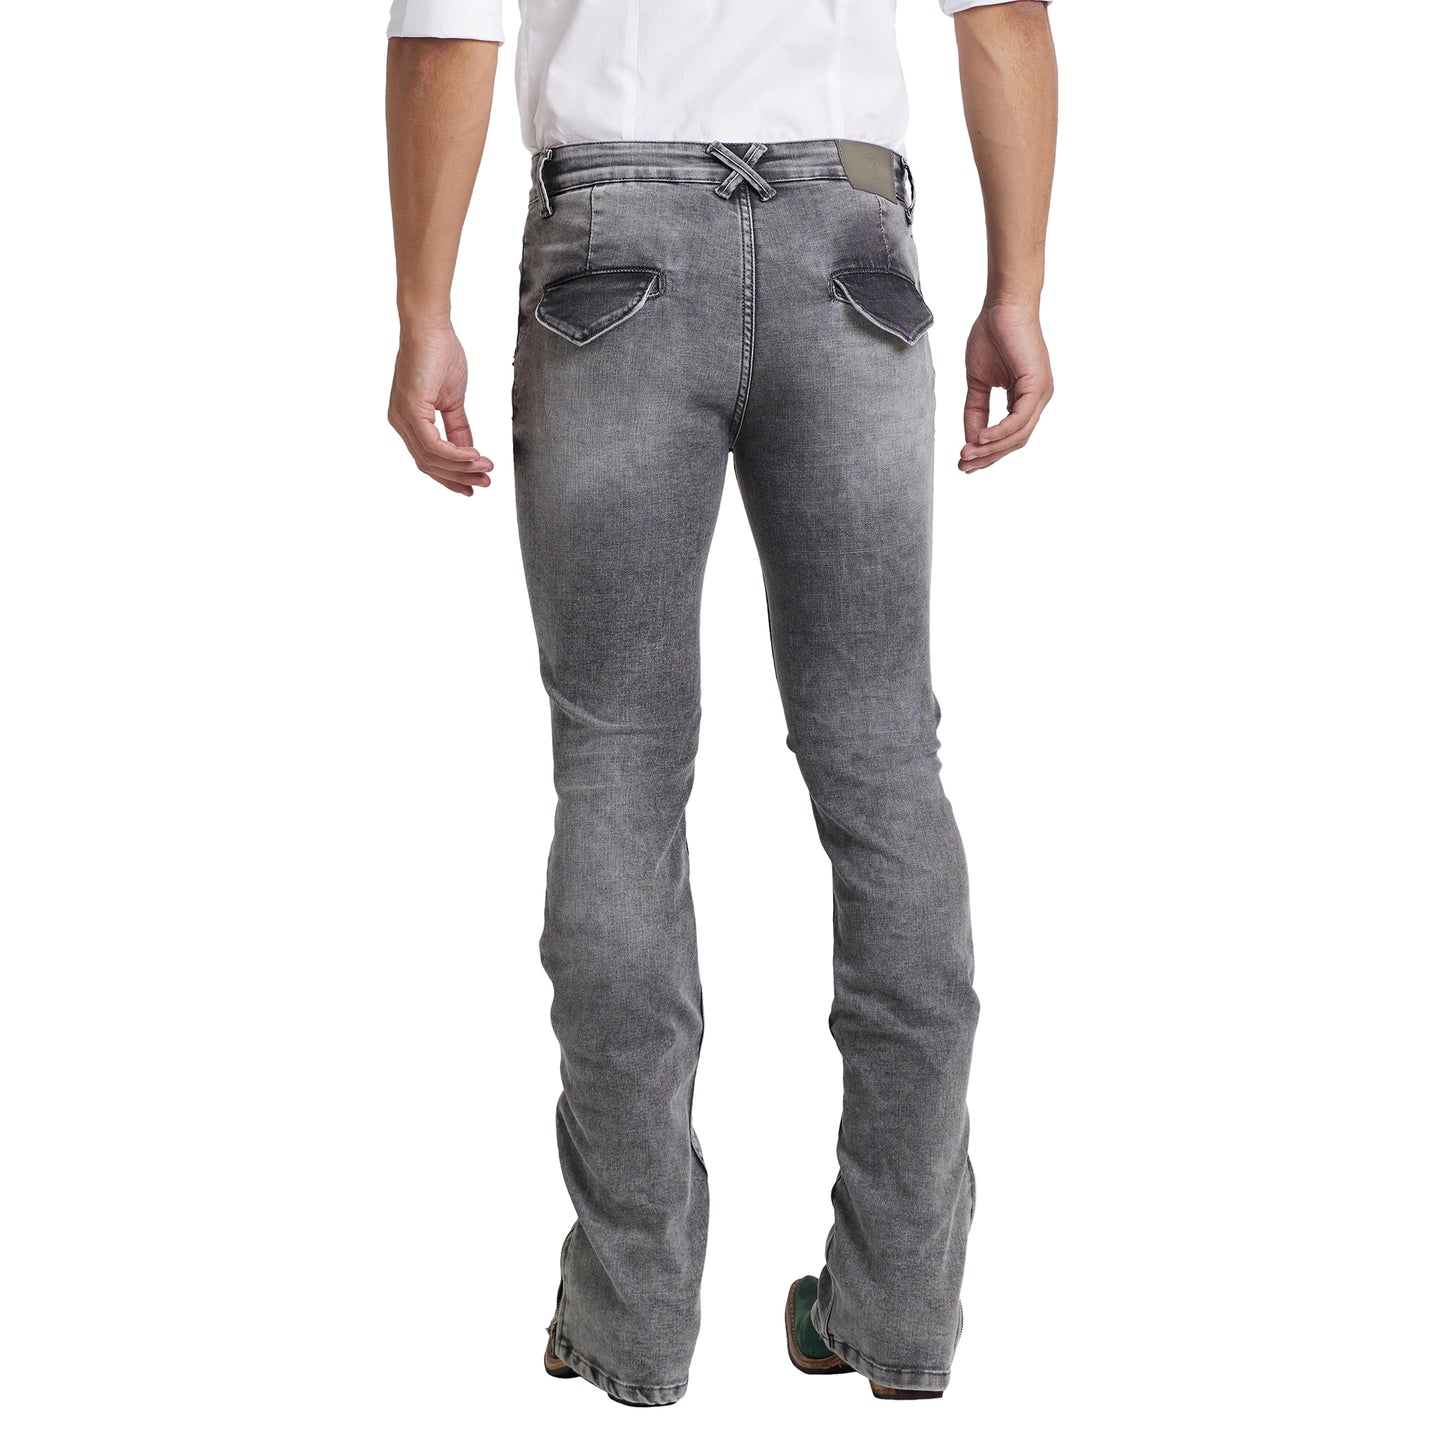 Mode De Base Mens's Casual  Slim Fit Carbon Grey Faded Bootcut Jeans With Zipper Bottom (Carbon Grey)